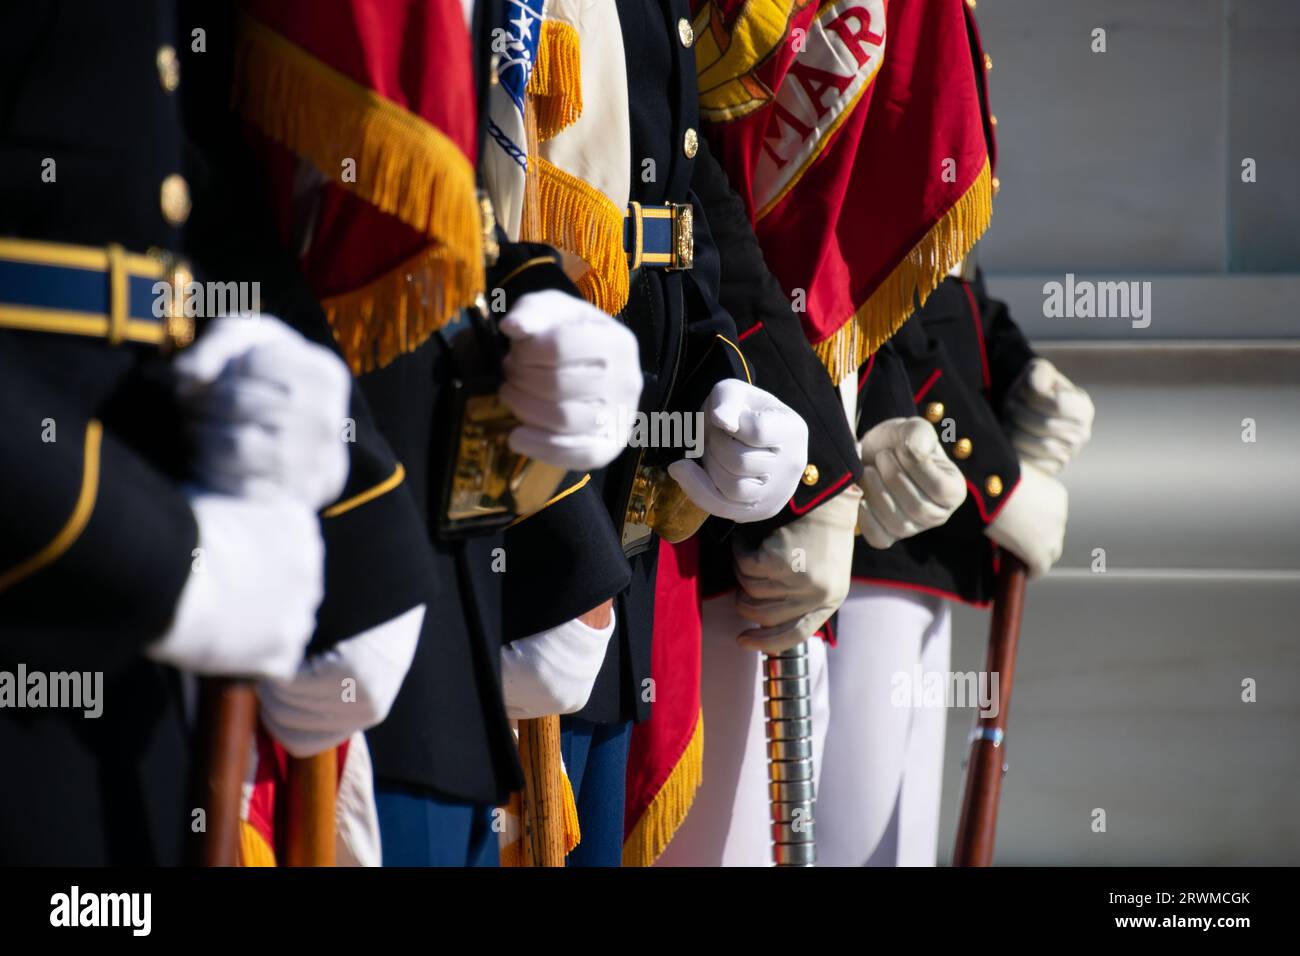 A close-up shot of the hands of armed soldiers marching in formation Stock Photo